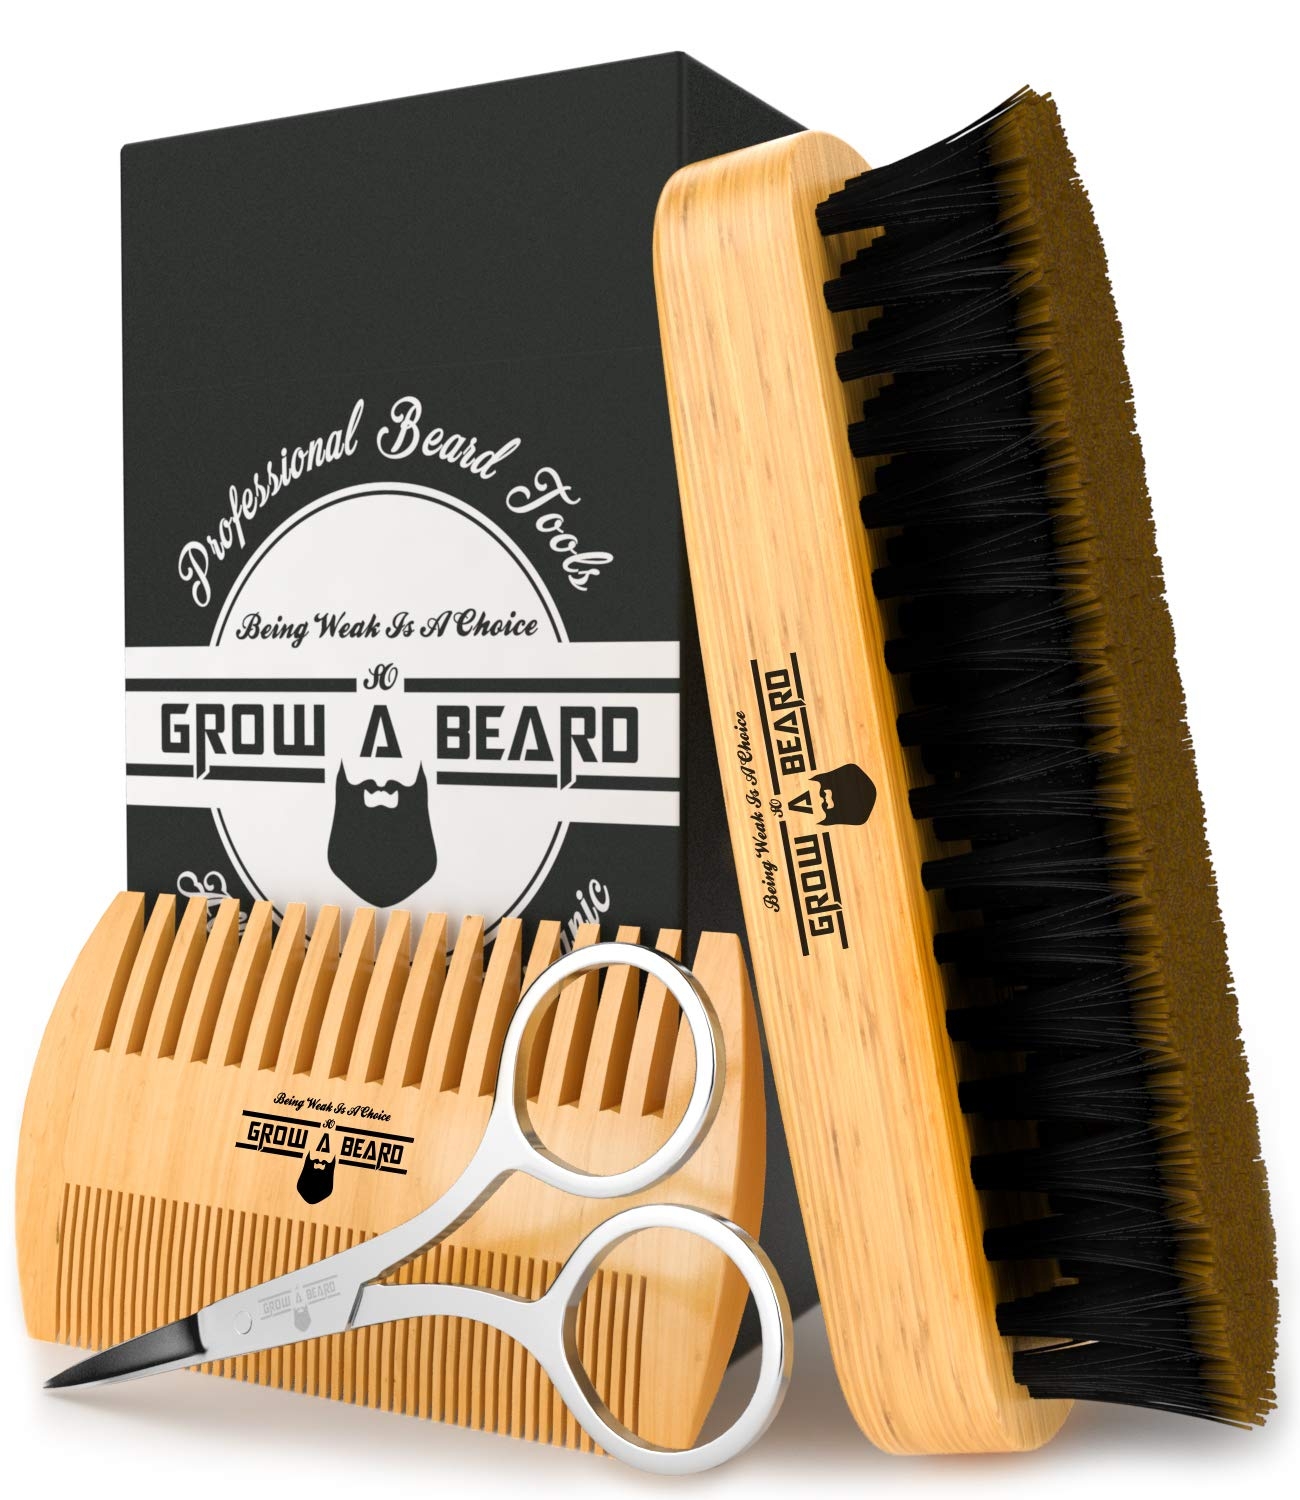 Beard Comb & Brush Set for Men's Care | Giveaway Mustache Scissors Presented in Premium Gift Box | Best Bamboo Grooming Kit to Spread Balm or Oil for Growth & Styling | Adds Shine & Softness